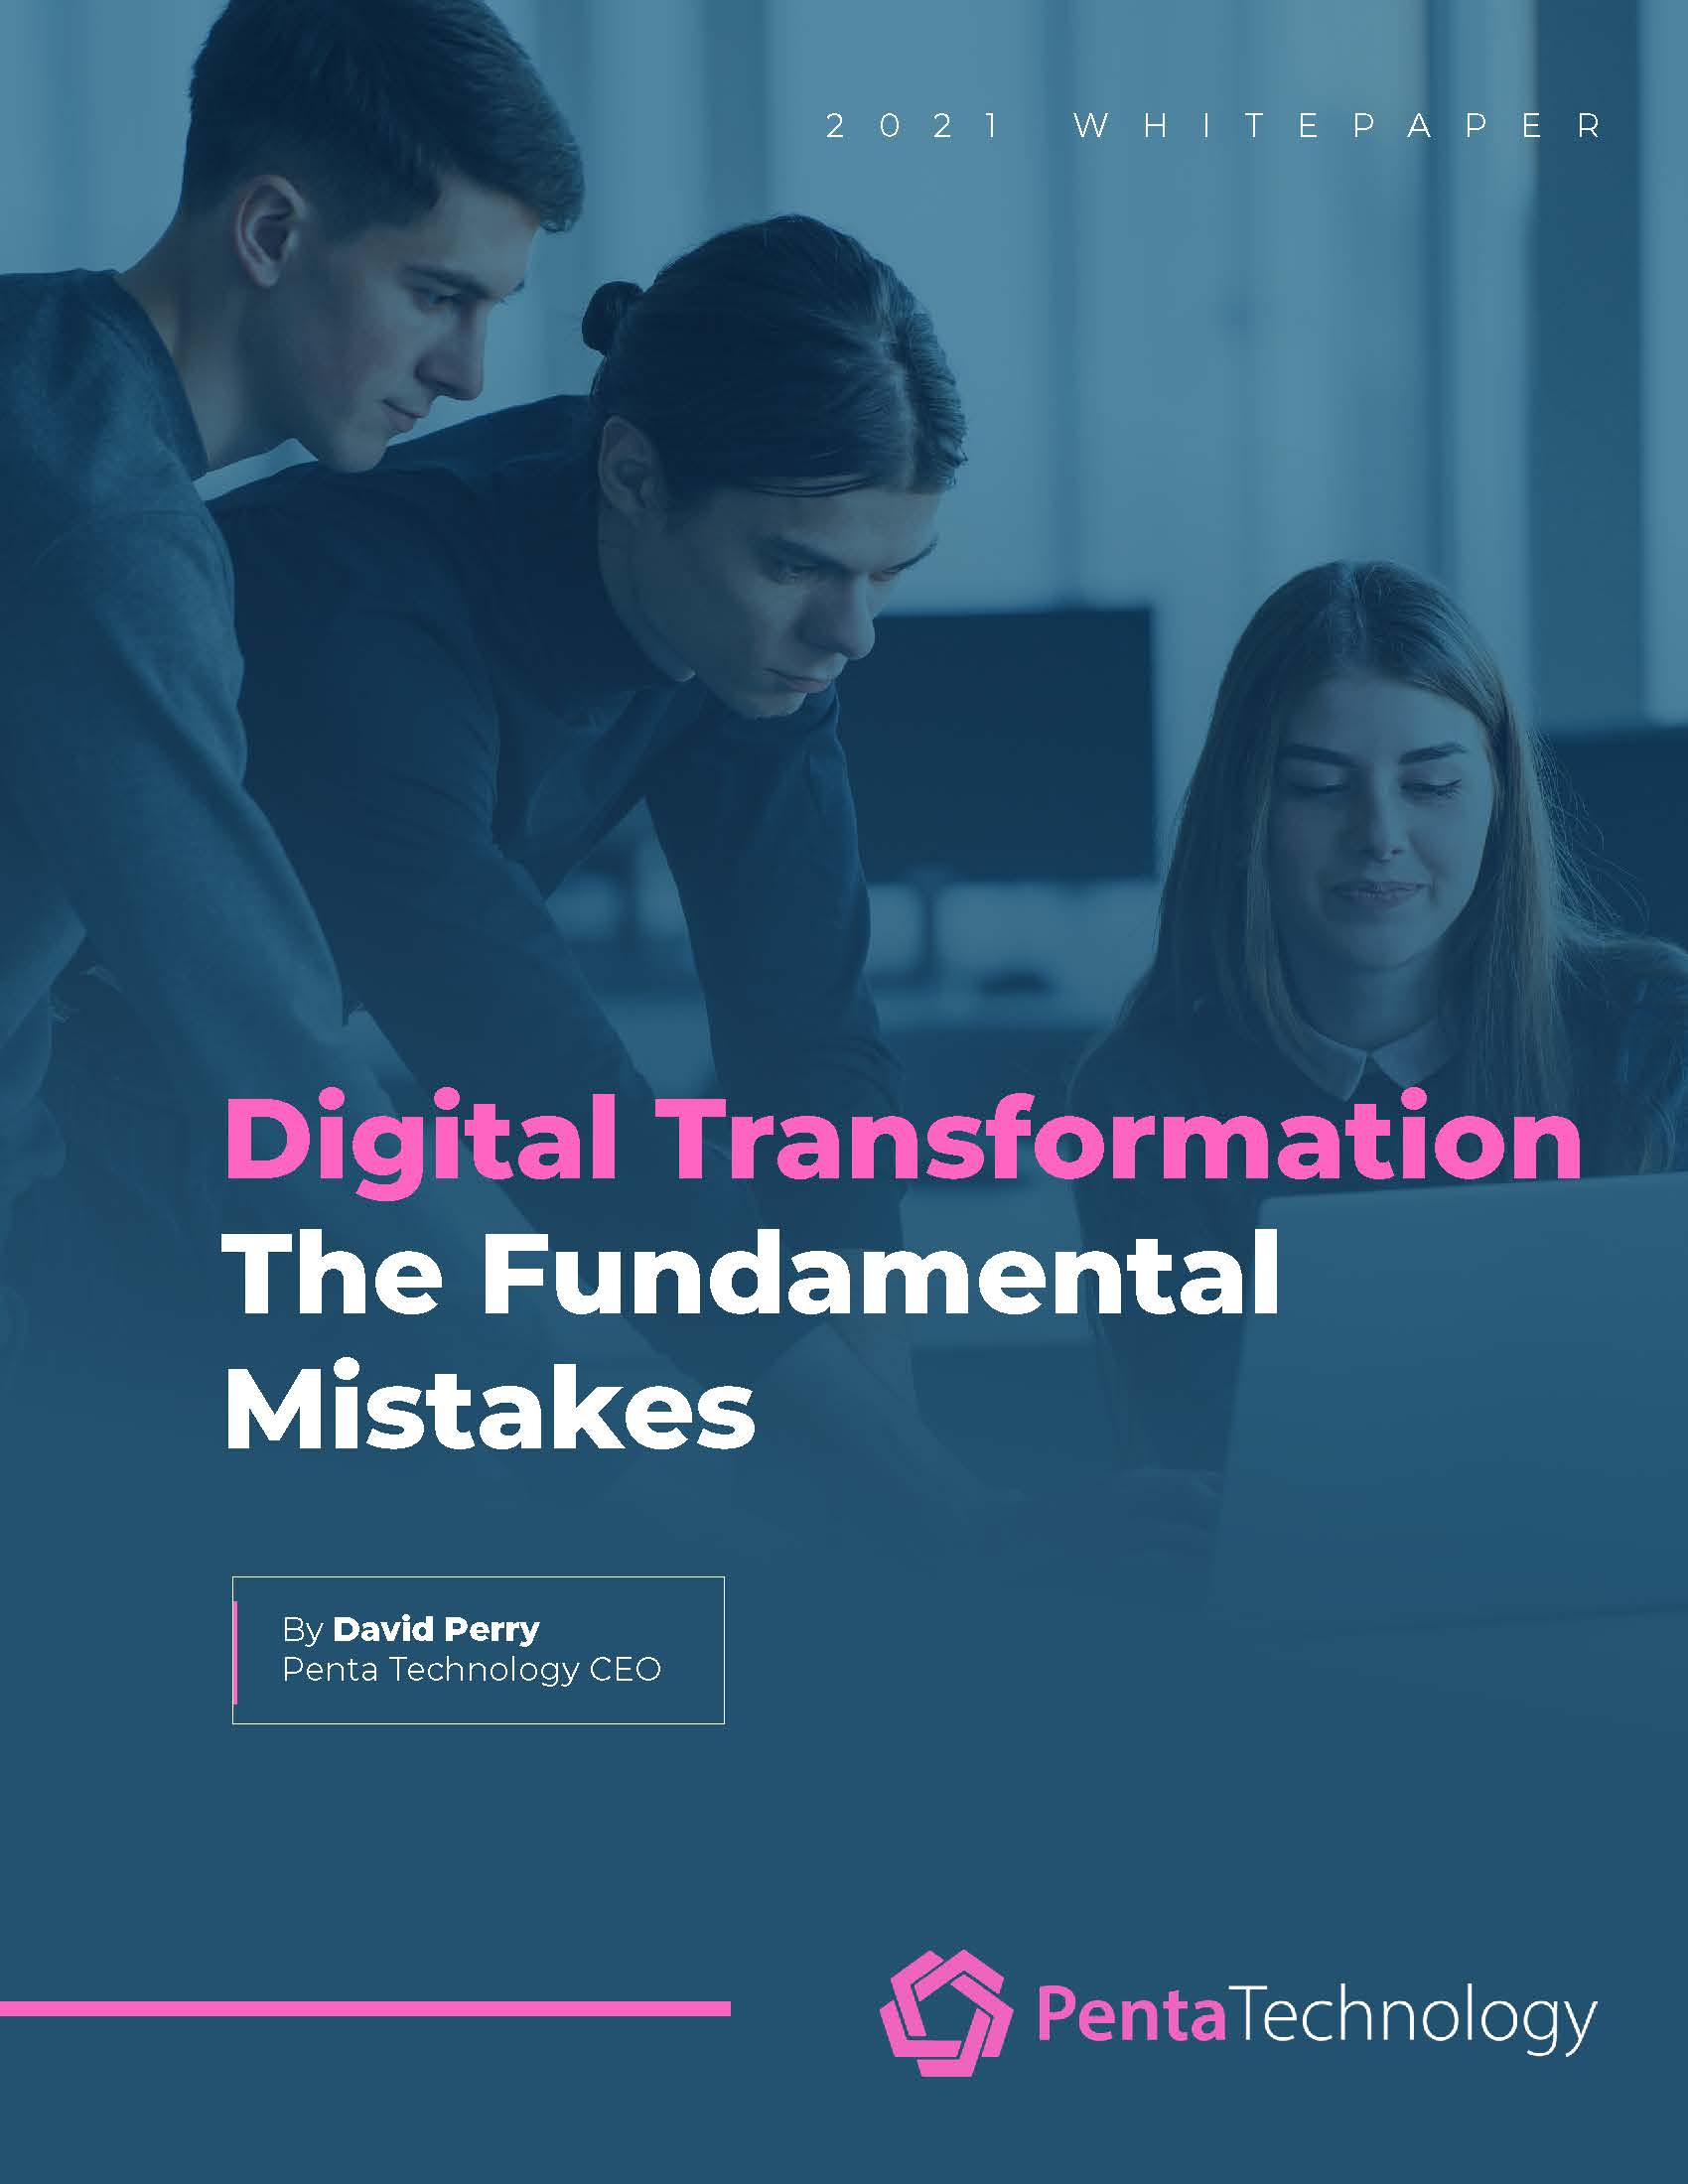 Digital Transformation The Fundamental Mistakes_White Paper_Page_01